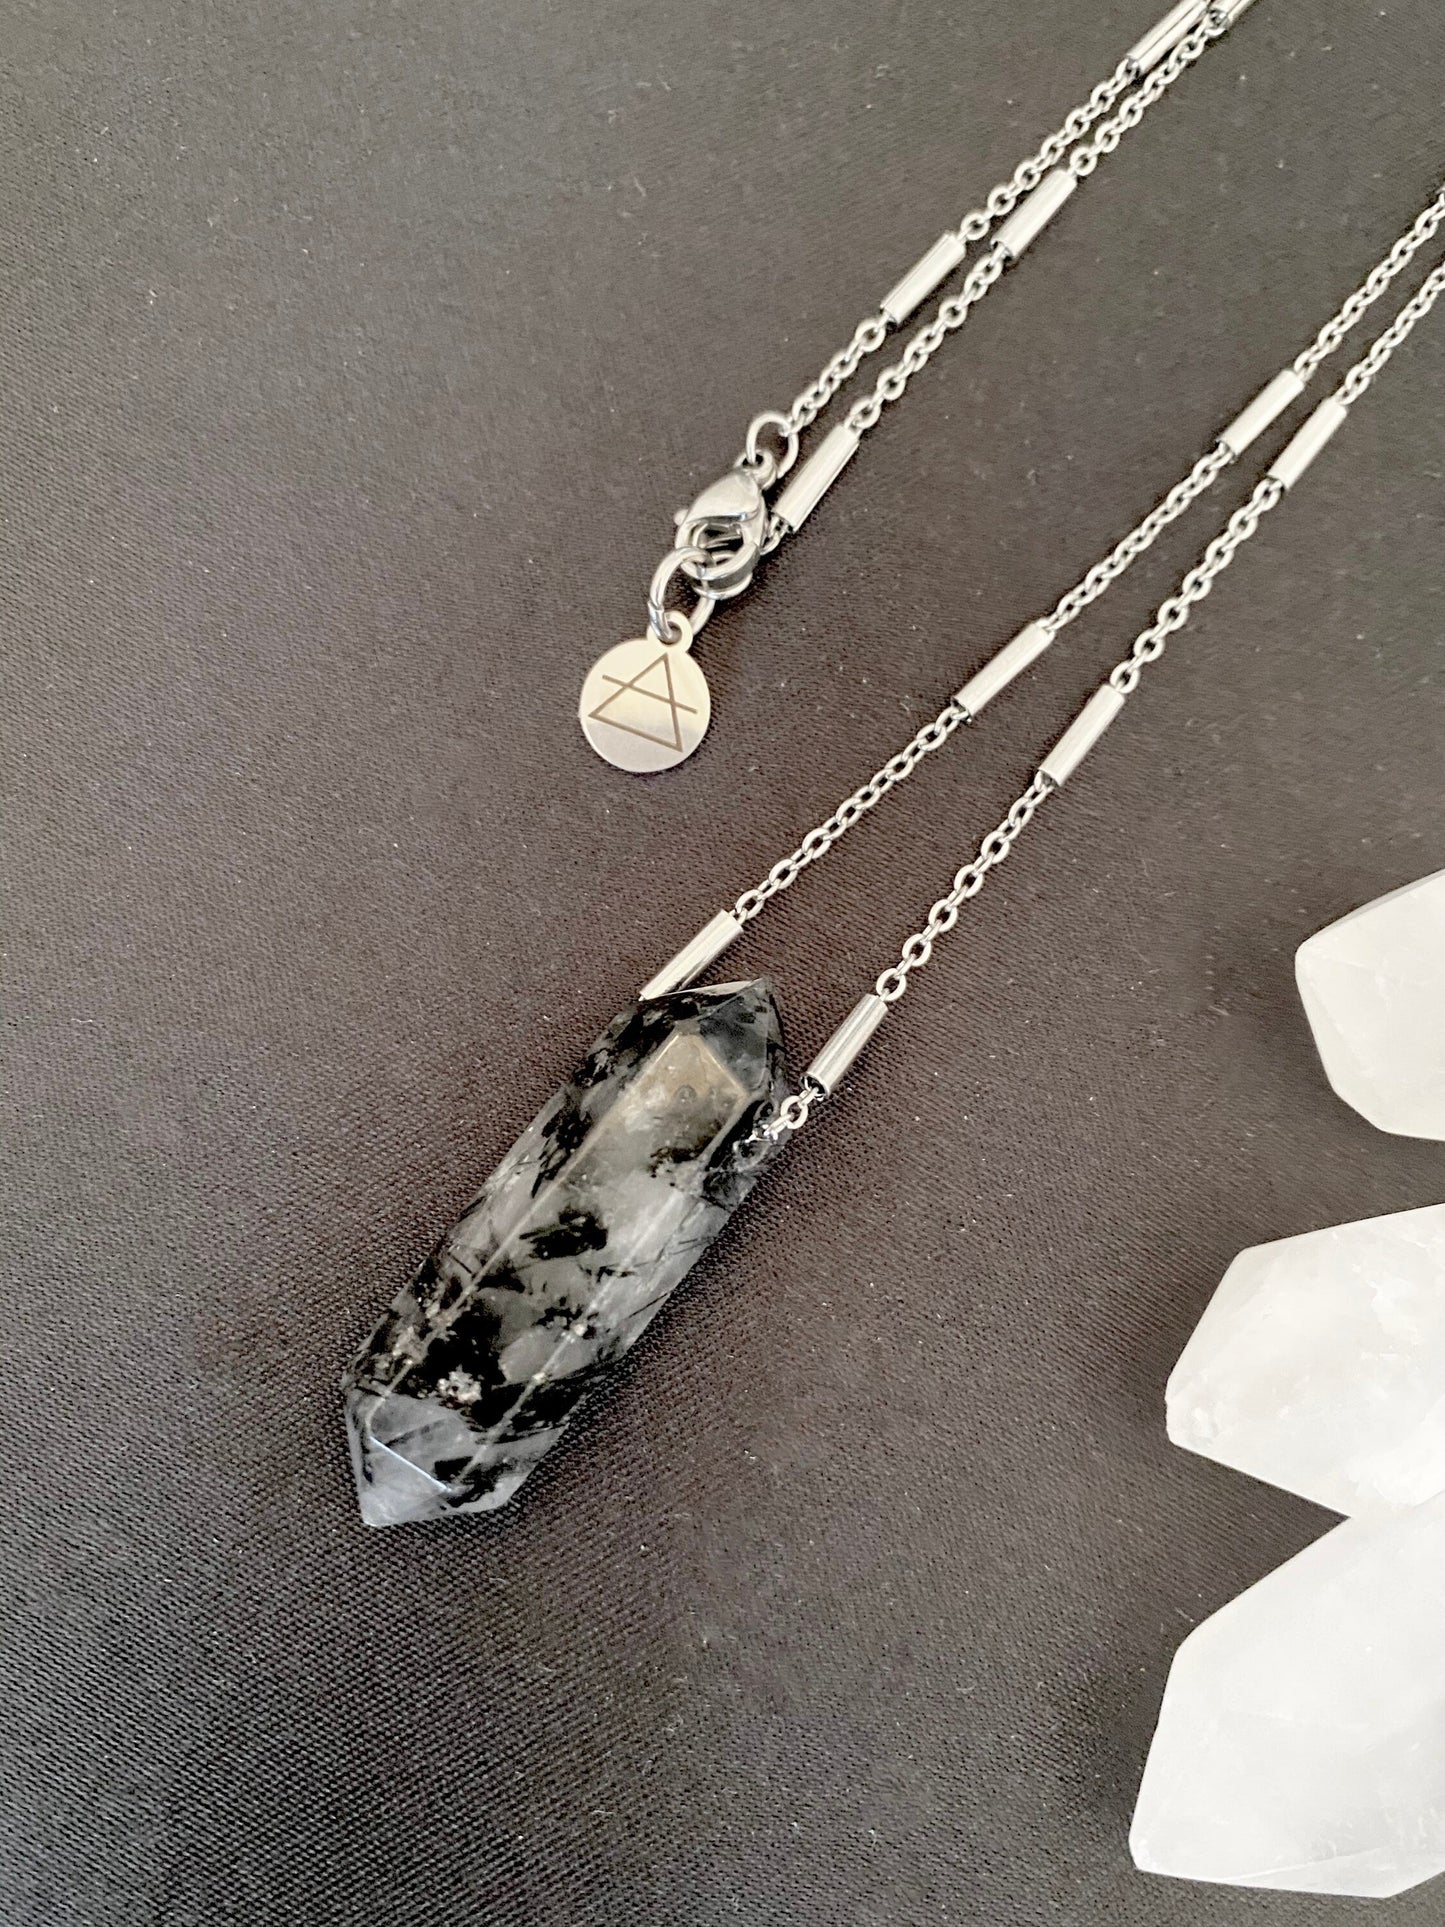 Long silver crystal necklace, double point Tourmalinated Quartz pendant, natural stone pendant, satellite chain, stainless steel